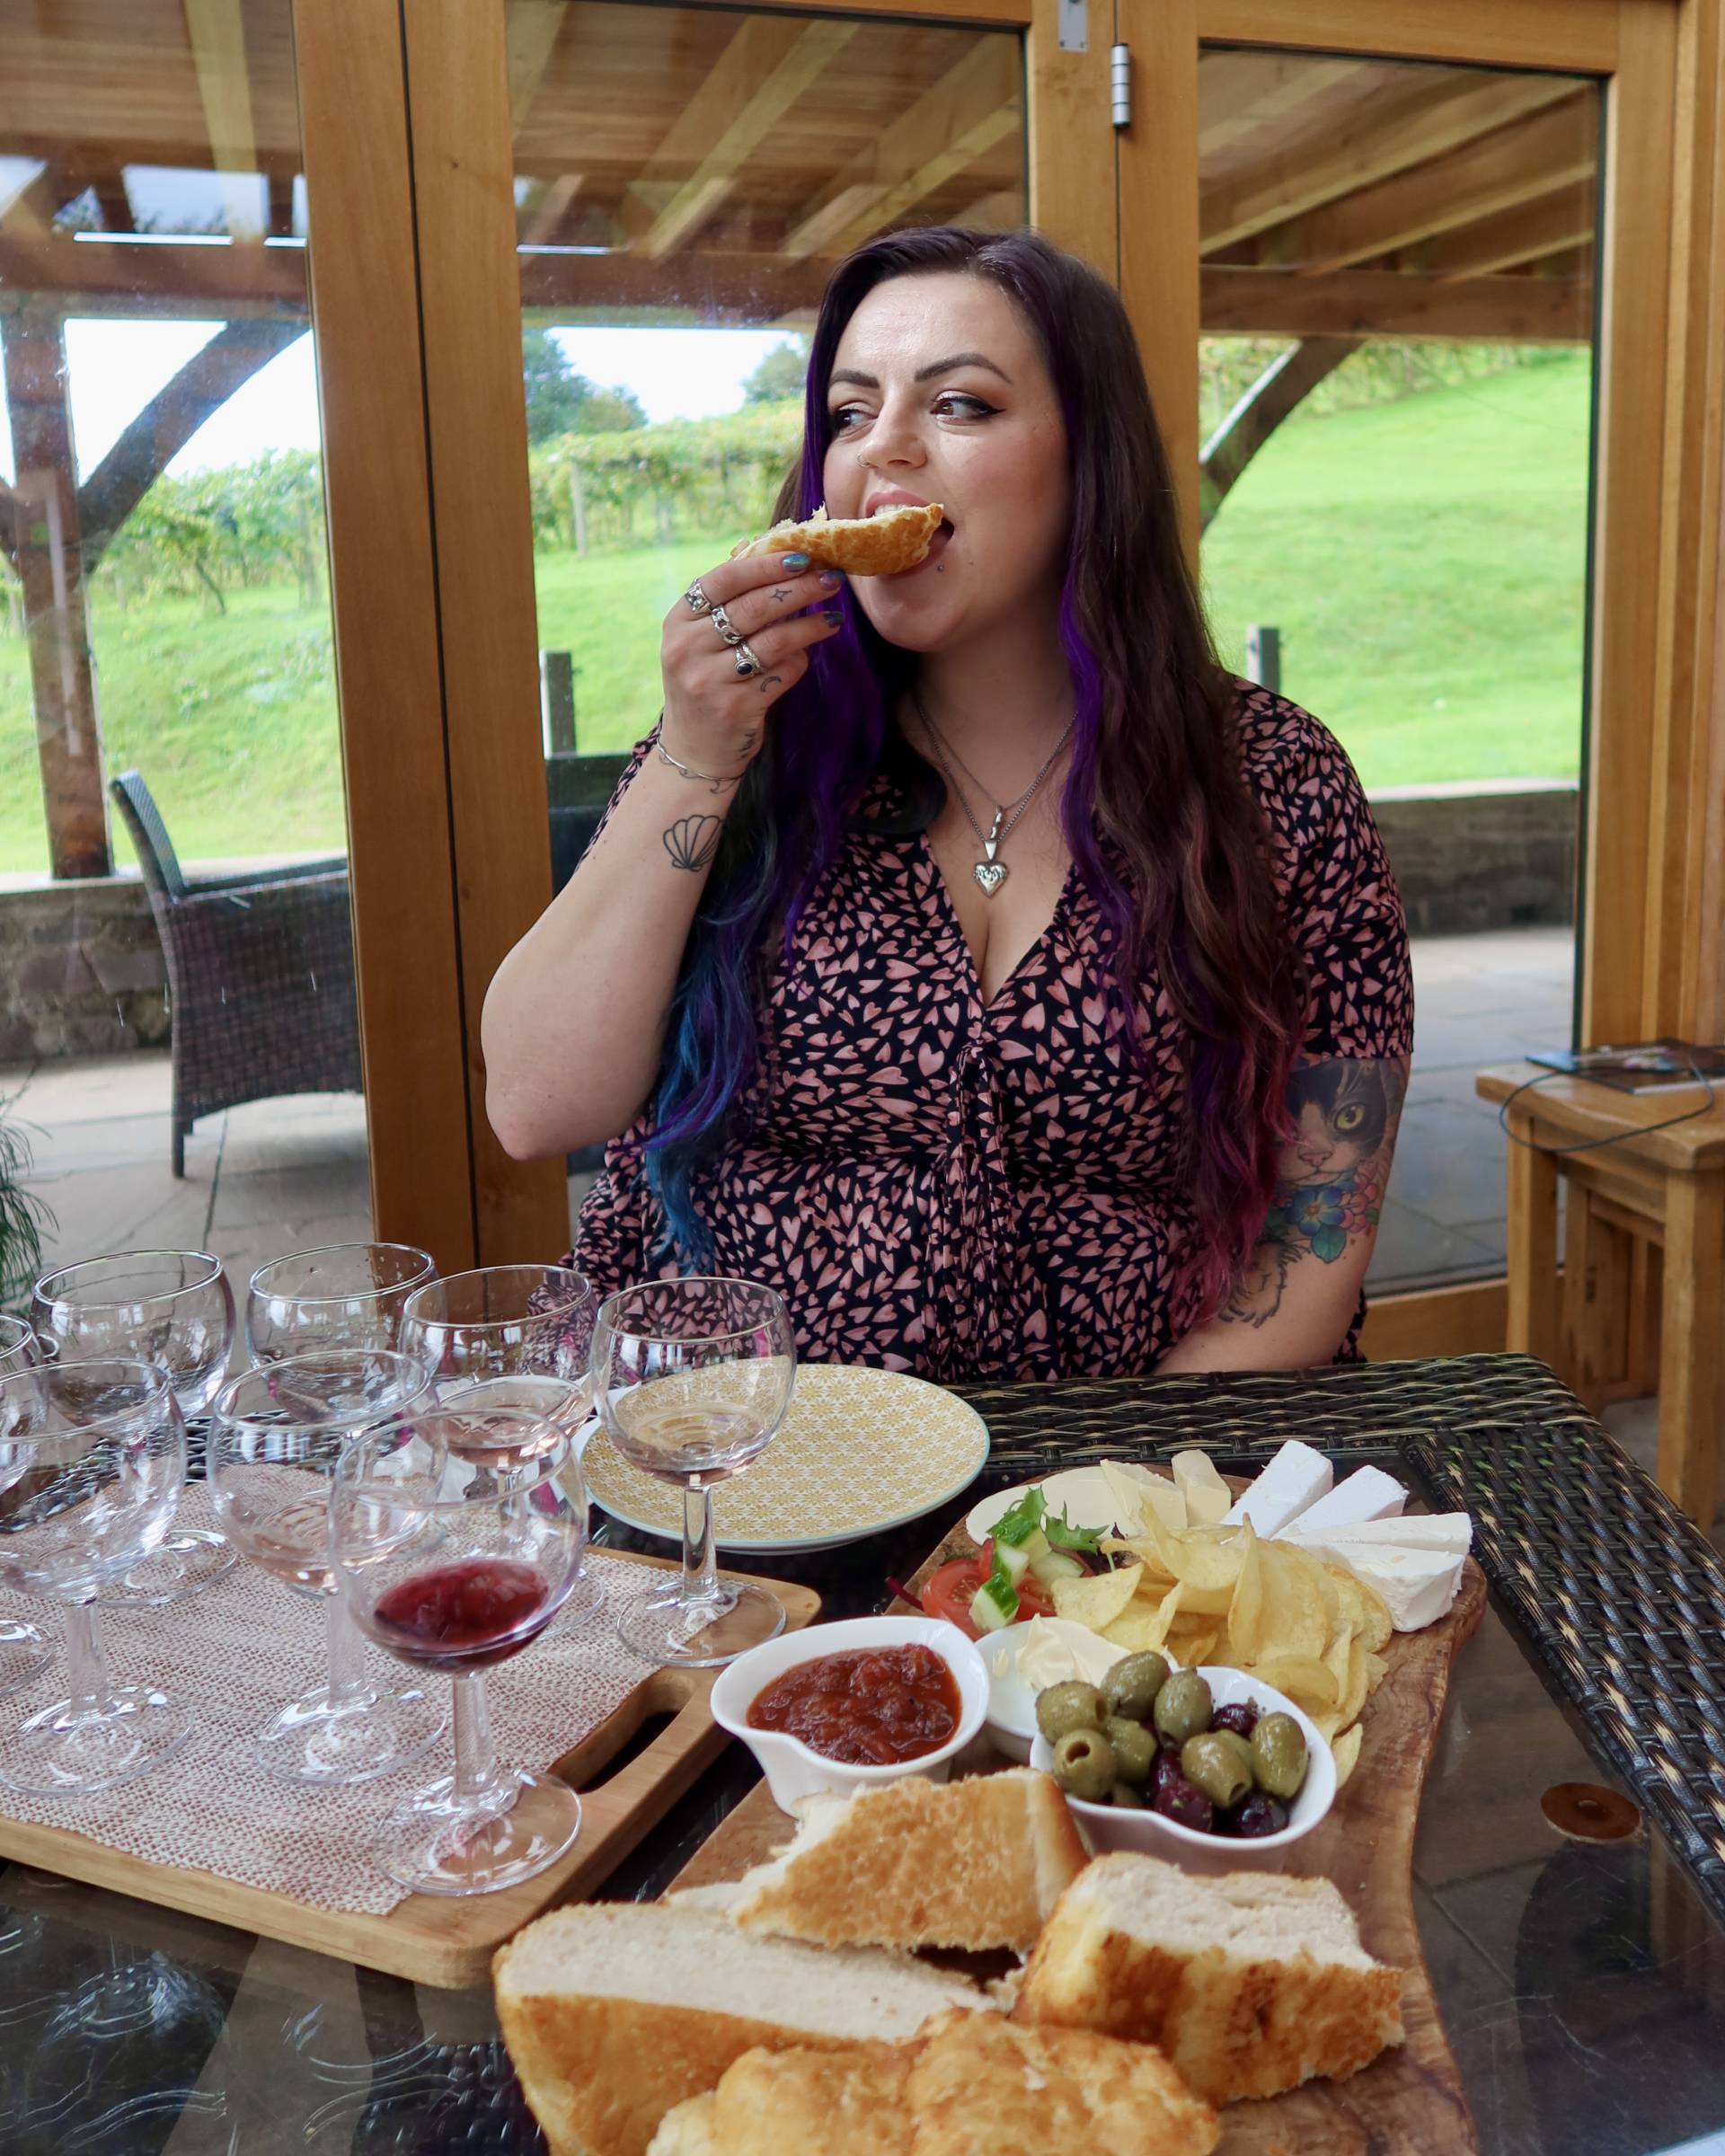 Luisa eats a piece of bread with a vegan cheese platter and wine tasting board in front of her at Sugar Loaf Vineyard